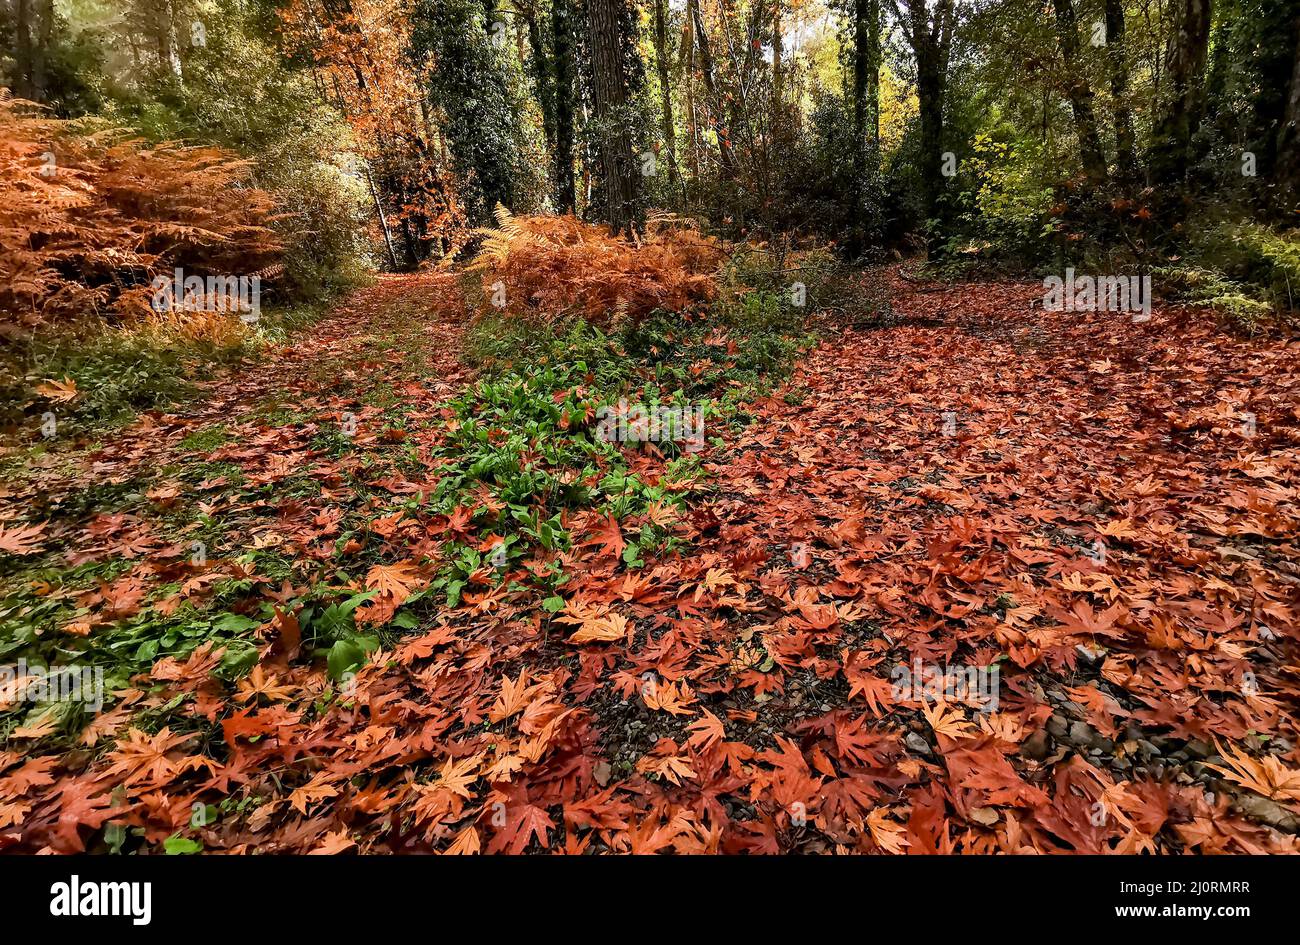 Fallen autumn leaves on grass in a forest. dry seasonal leaves foliage in the ground Stock Photo